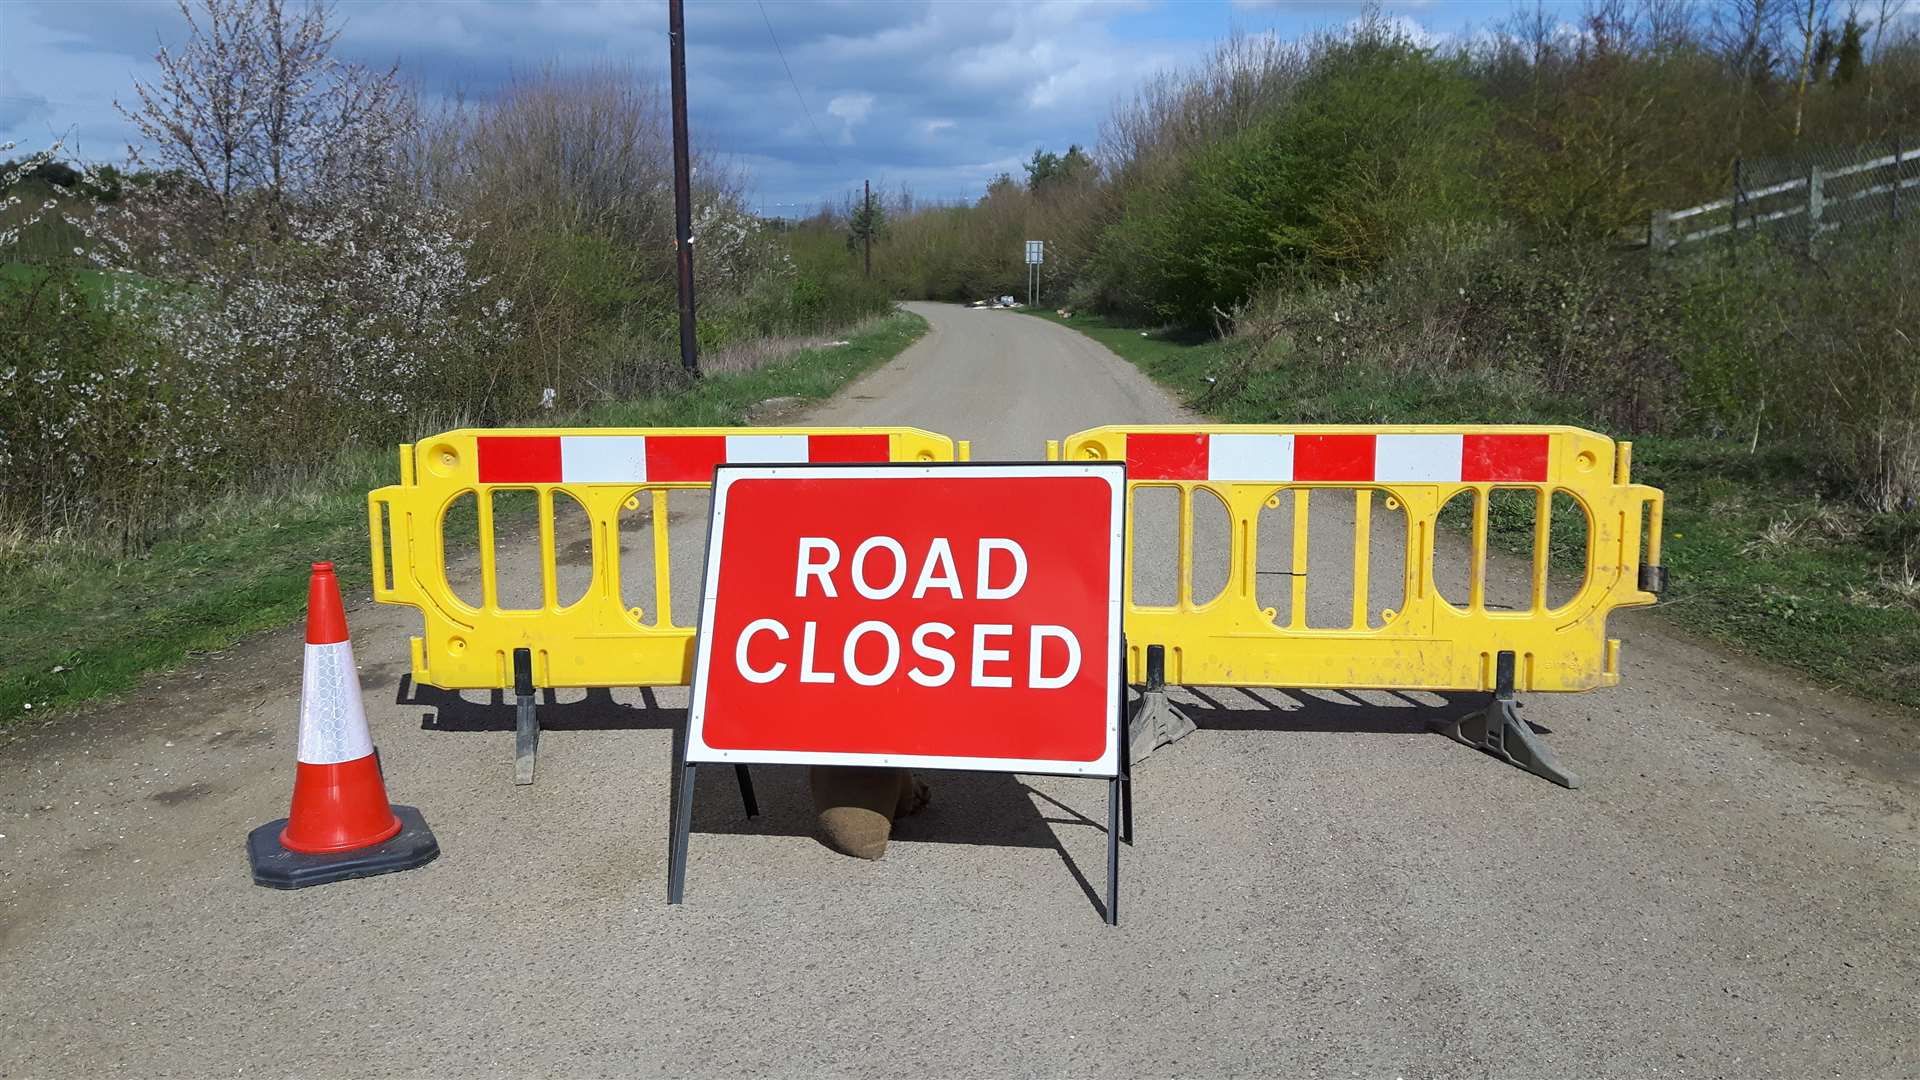 Northfleet Green Road, near Gravesend, has been closed due to fly-tipping (8279199)